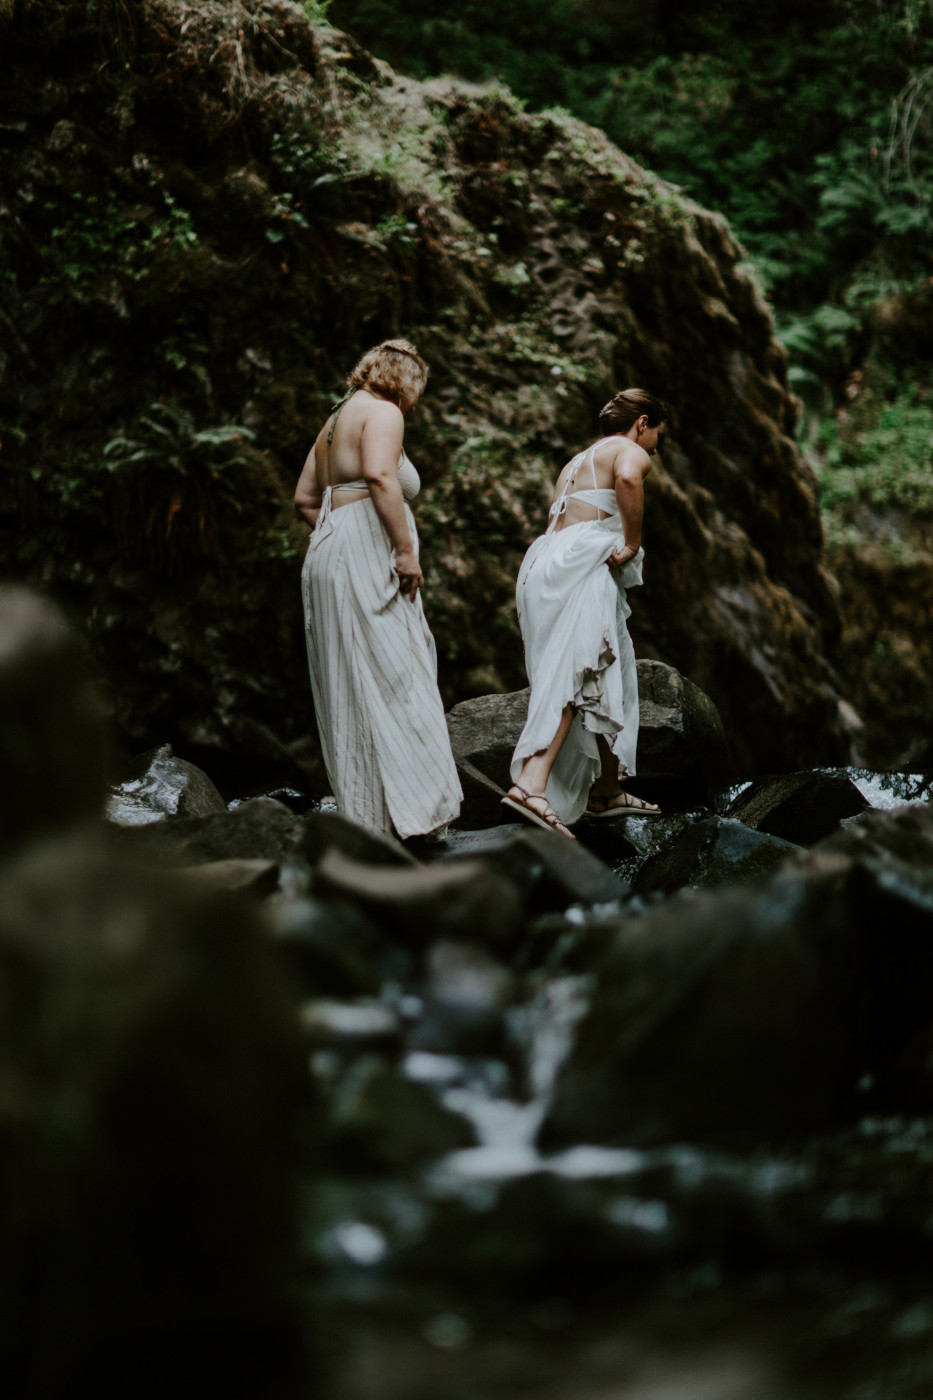 Kate and Audrey cross the river. Elopement wedding photography at Bridal Veil Falls by Sienna Plus Josh.